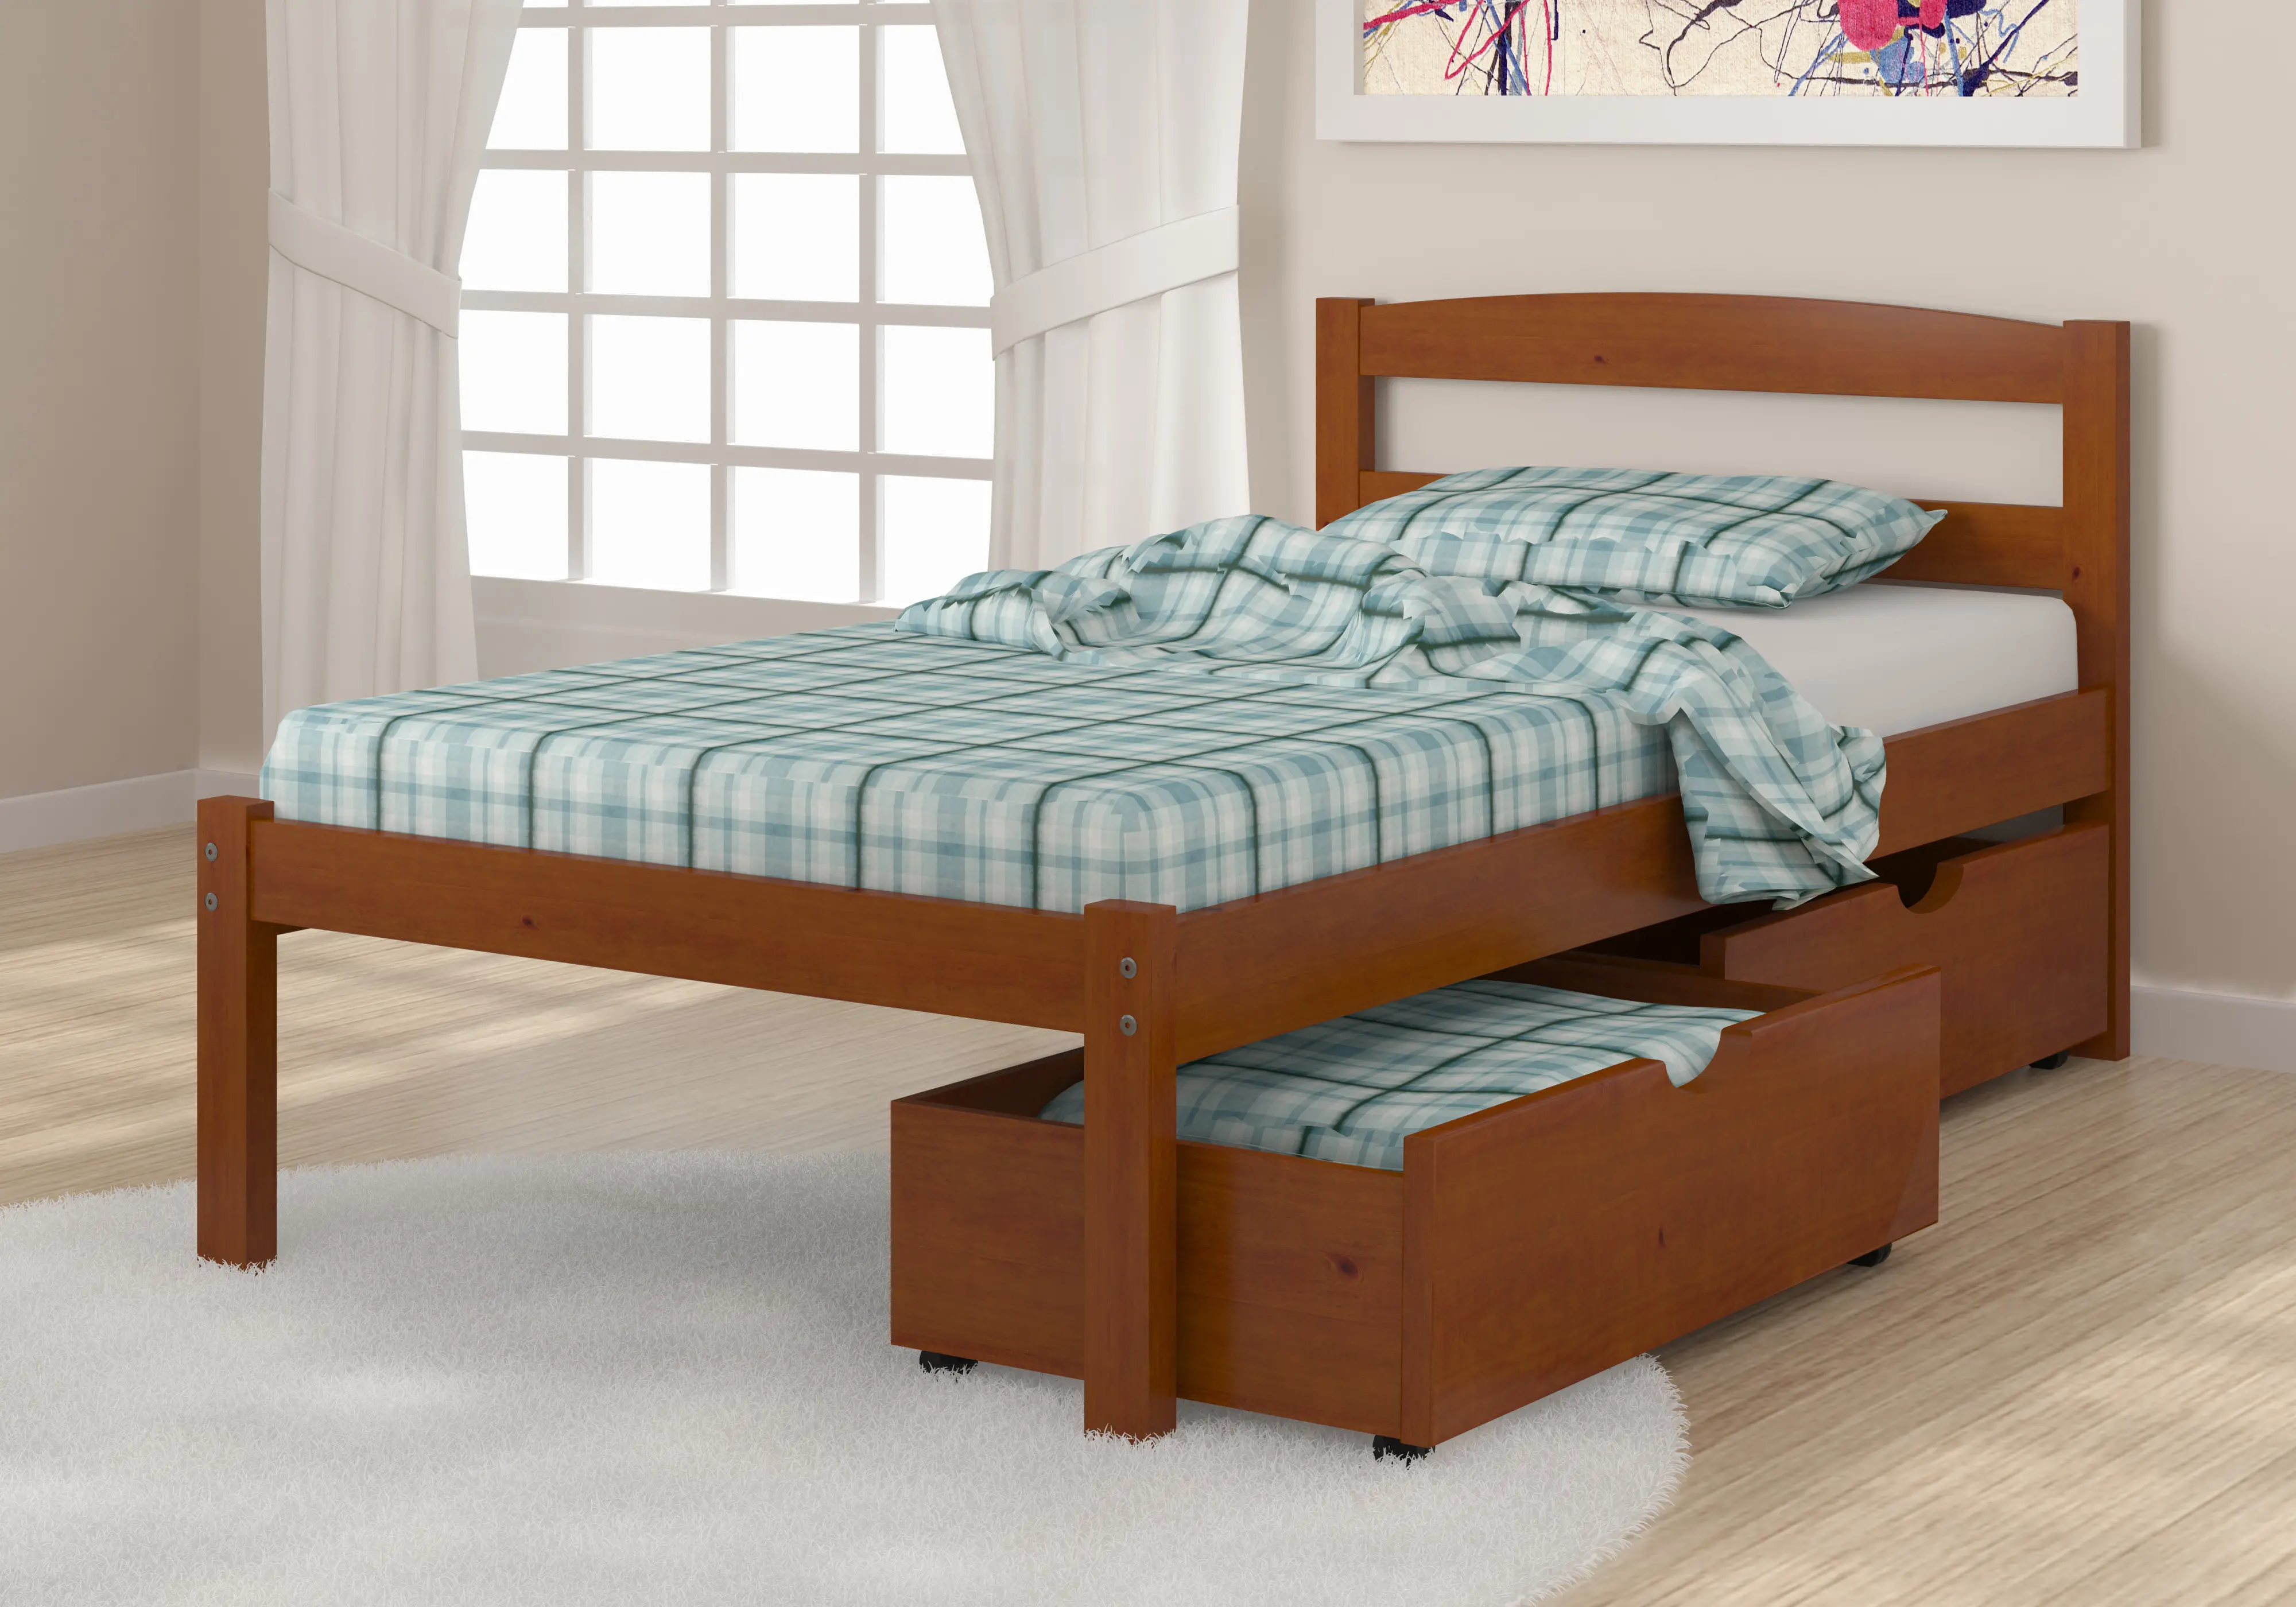 Photos - Bed Donco Trading Sierra Light Espresso Twin  with Dual Underbed Drawers 57